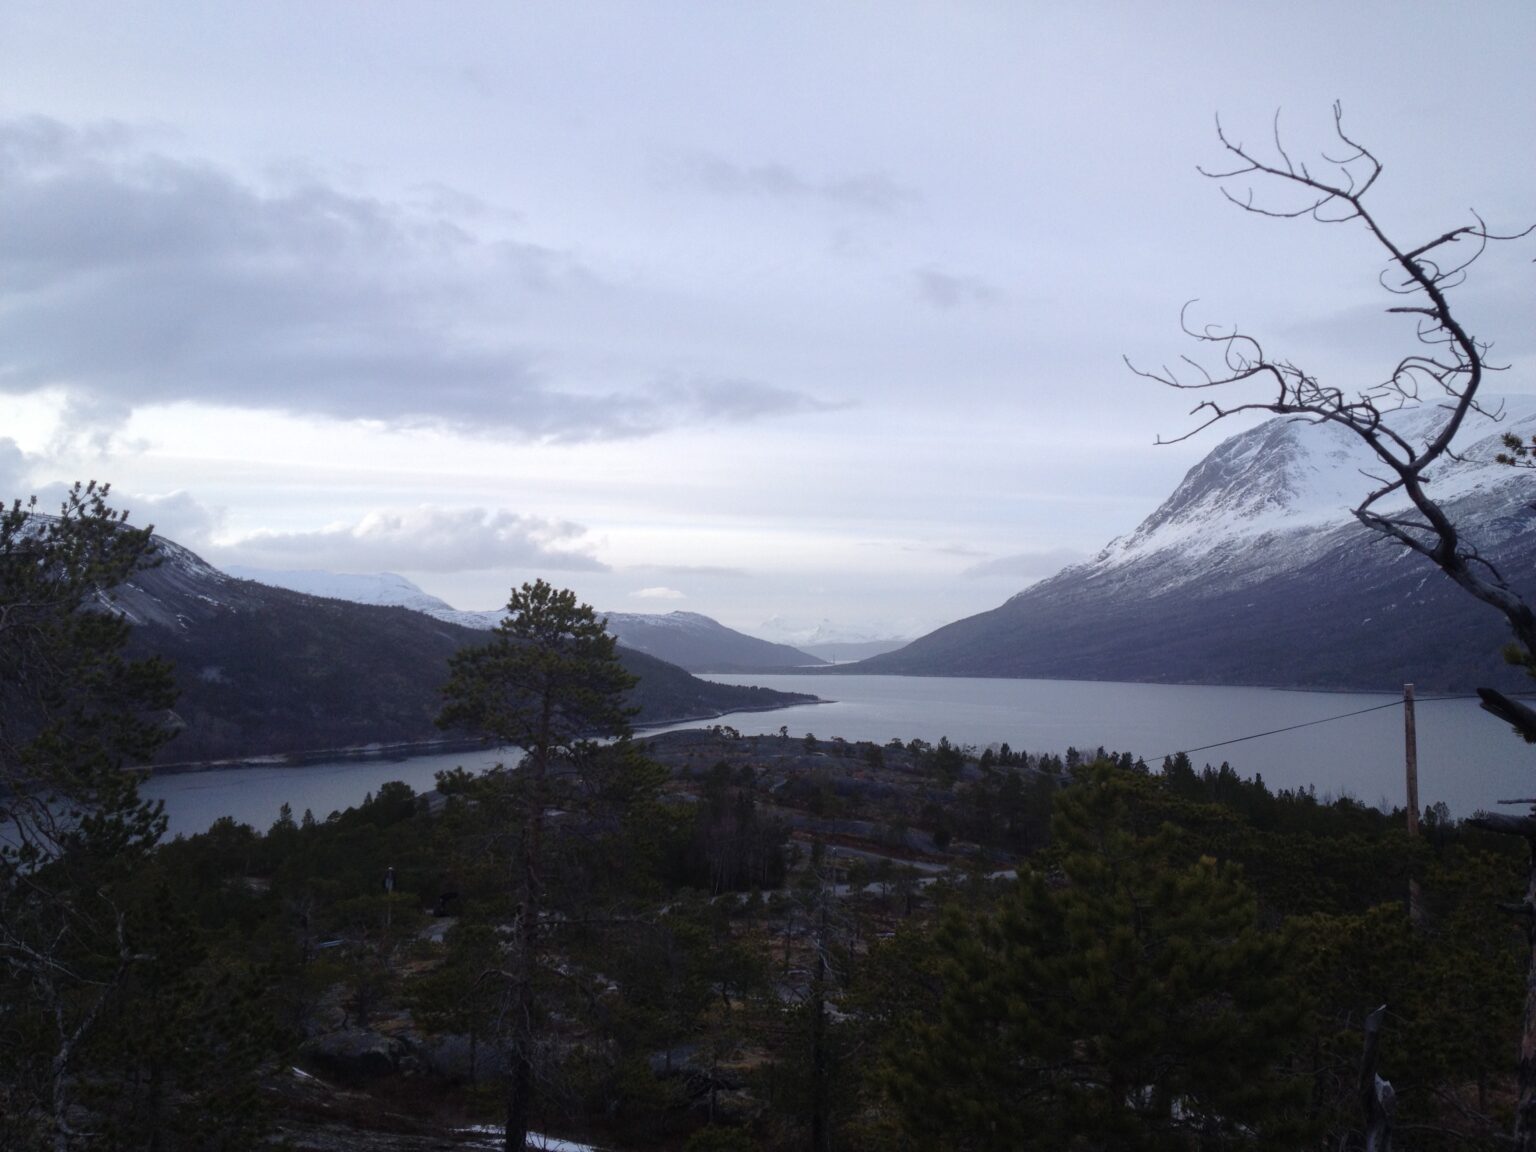 Camping in the Skjomen fjord with a beautiful view of the surrounding area